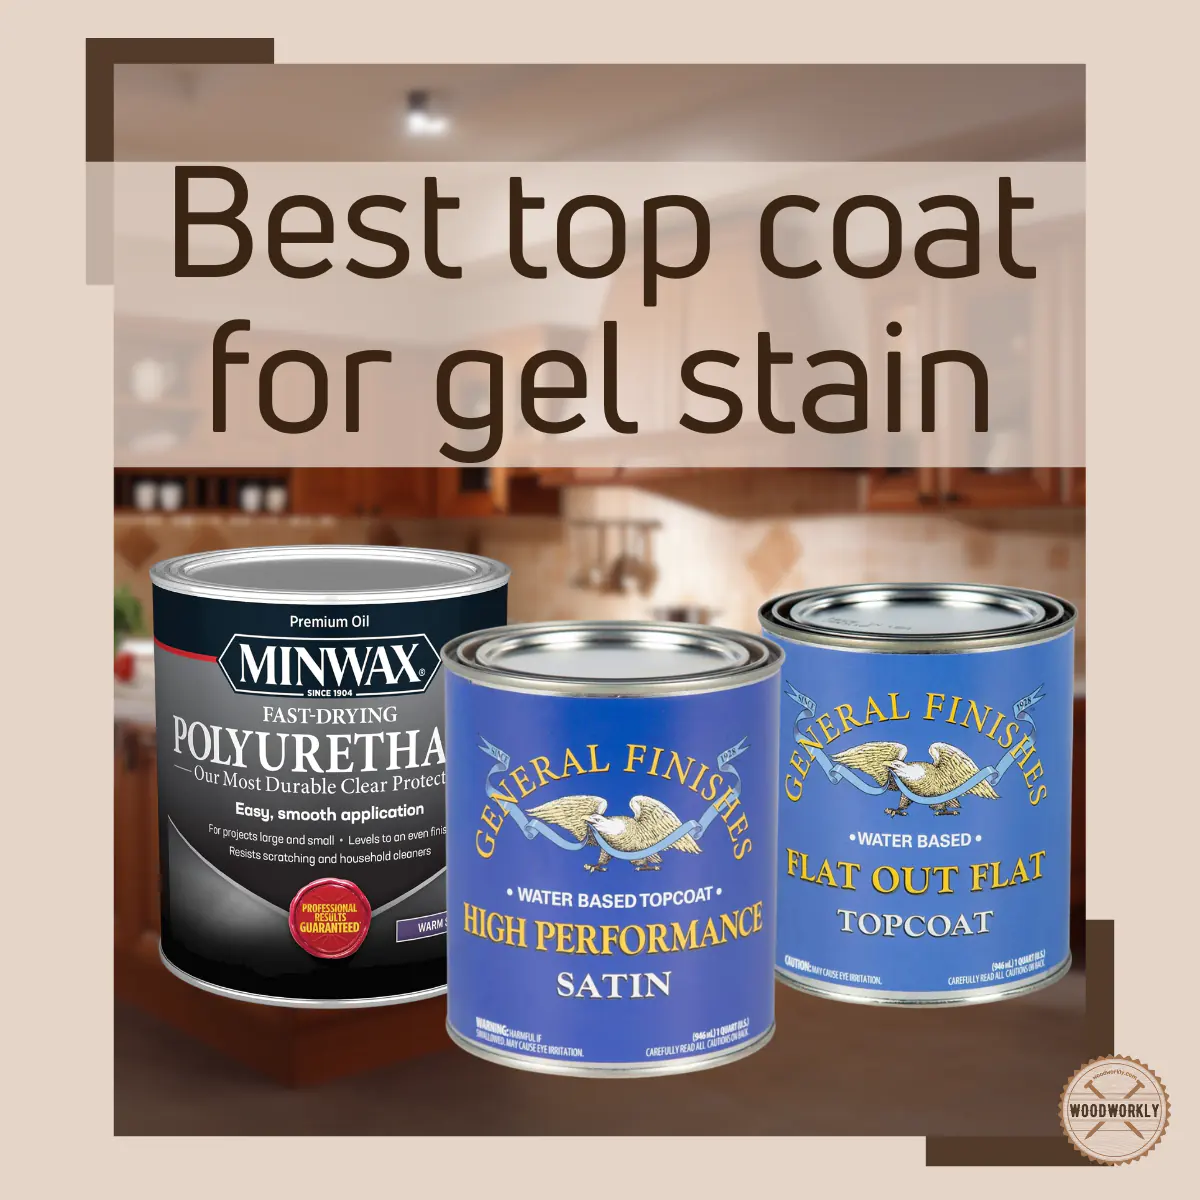 Best top coats for gel stain